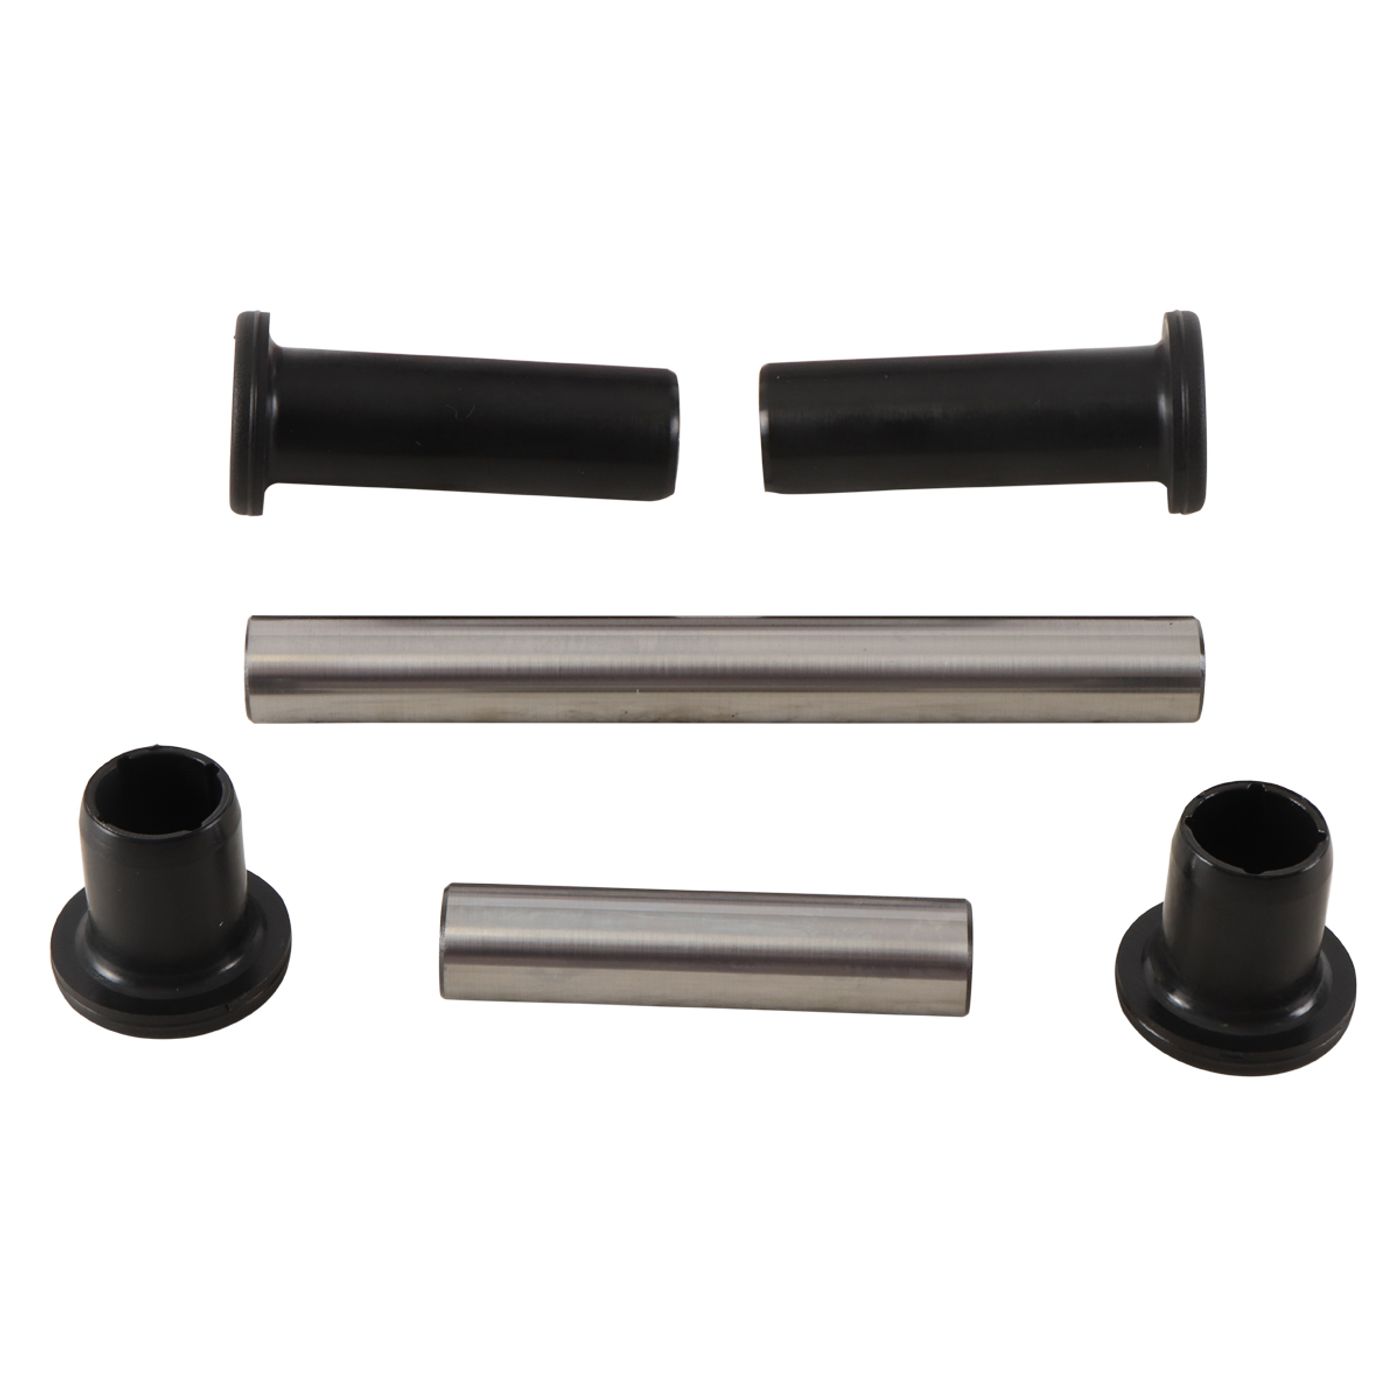 Wrp Rear Ind. Suspension Kits - WRP501215 image